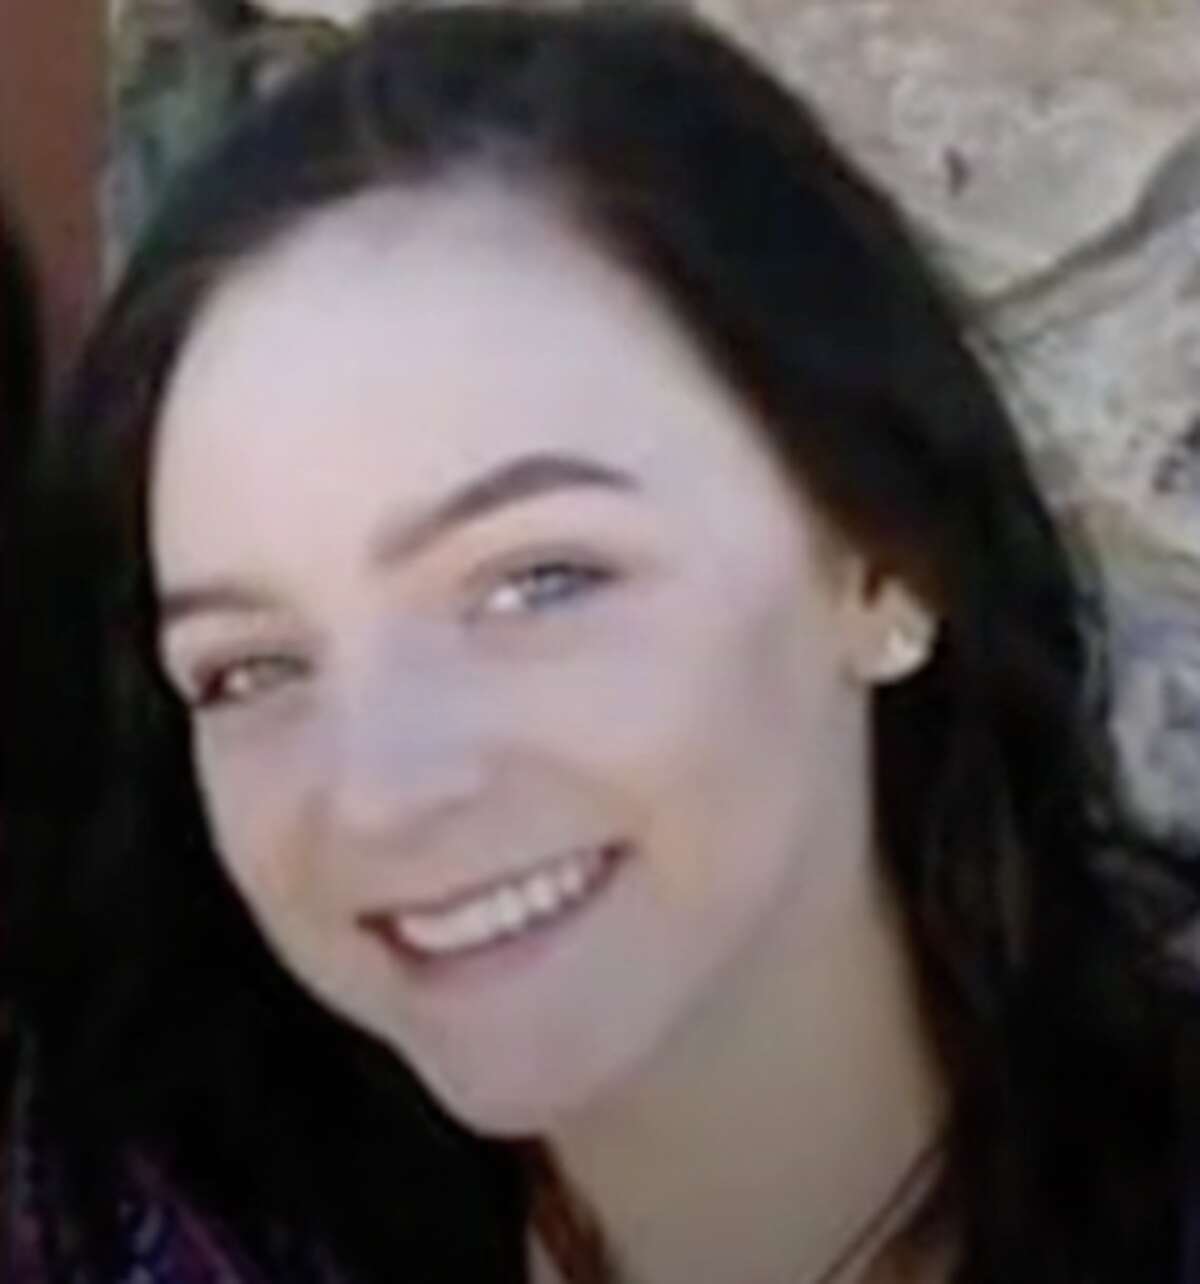 Larissa Cole's body was found Sunday behind Viking Skate in Redding. Police say a suspect has confessed to the 20-year-old Redding woman's murder.